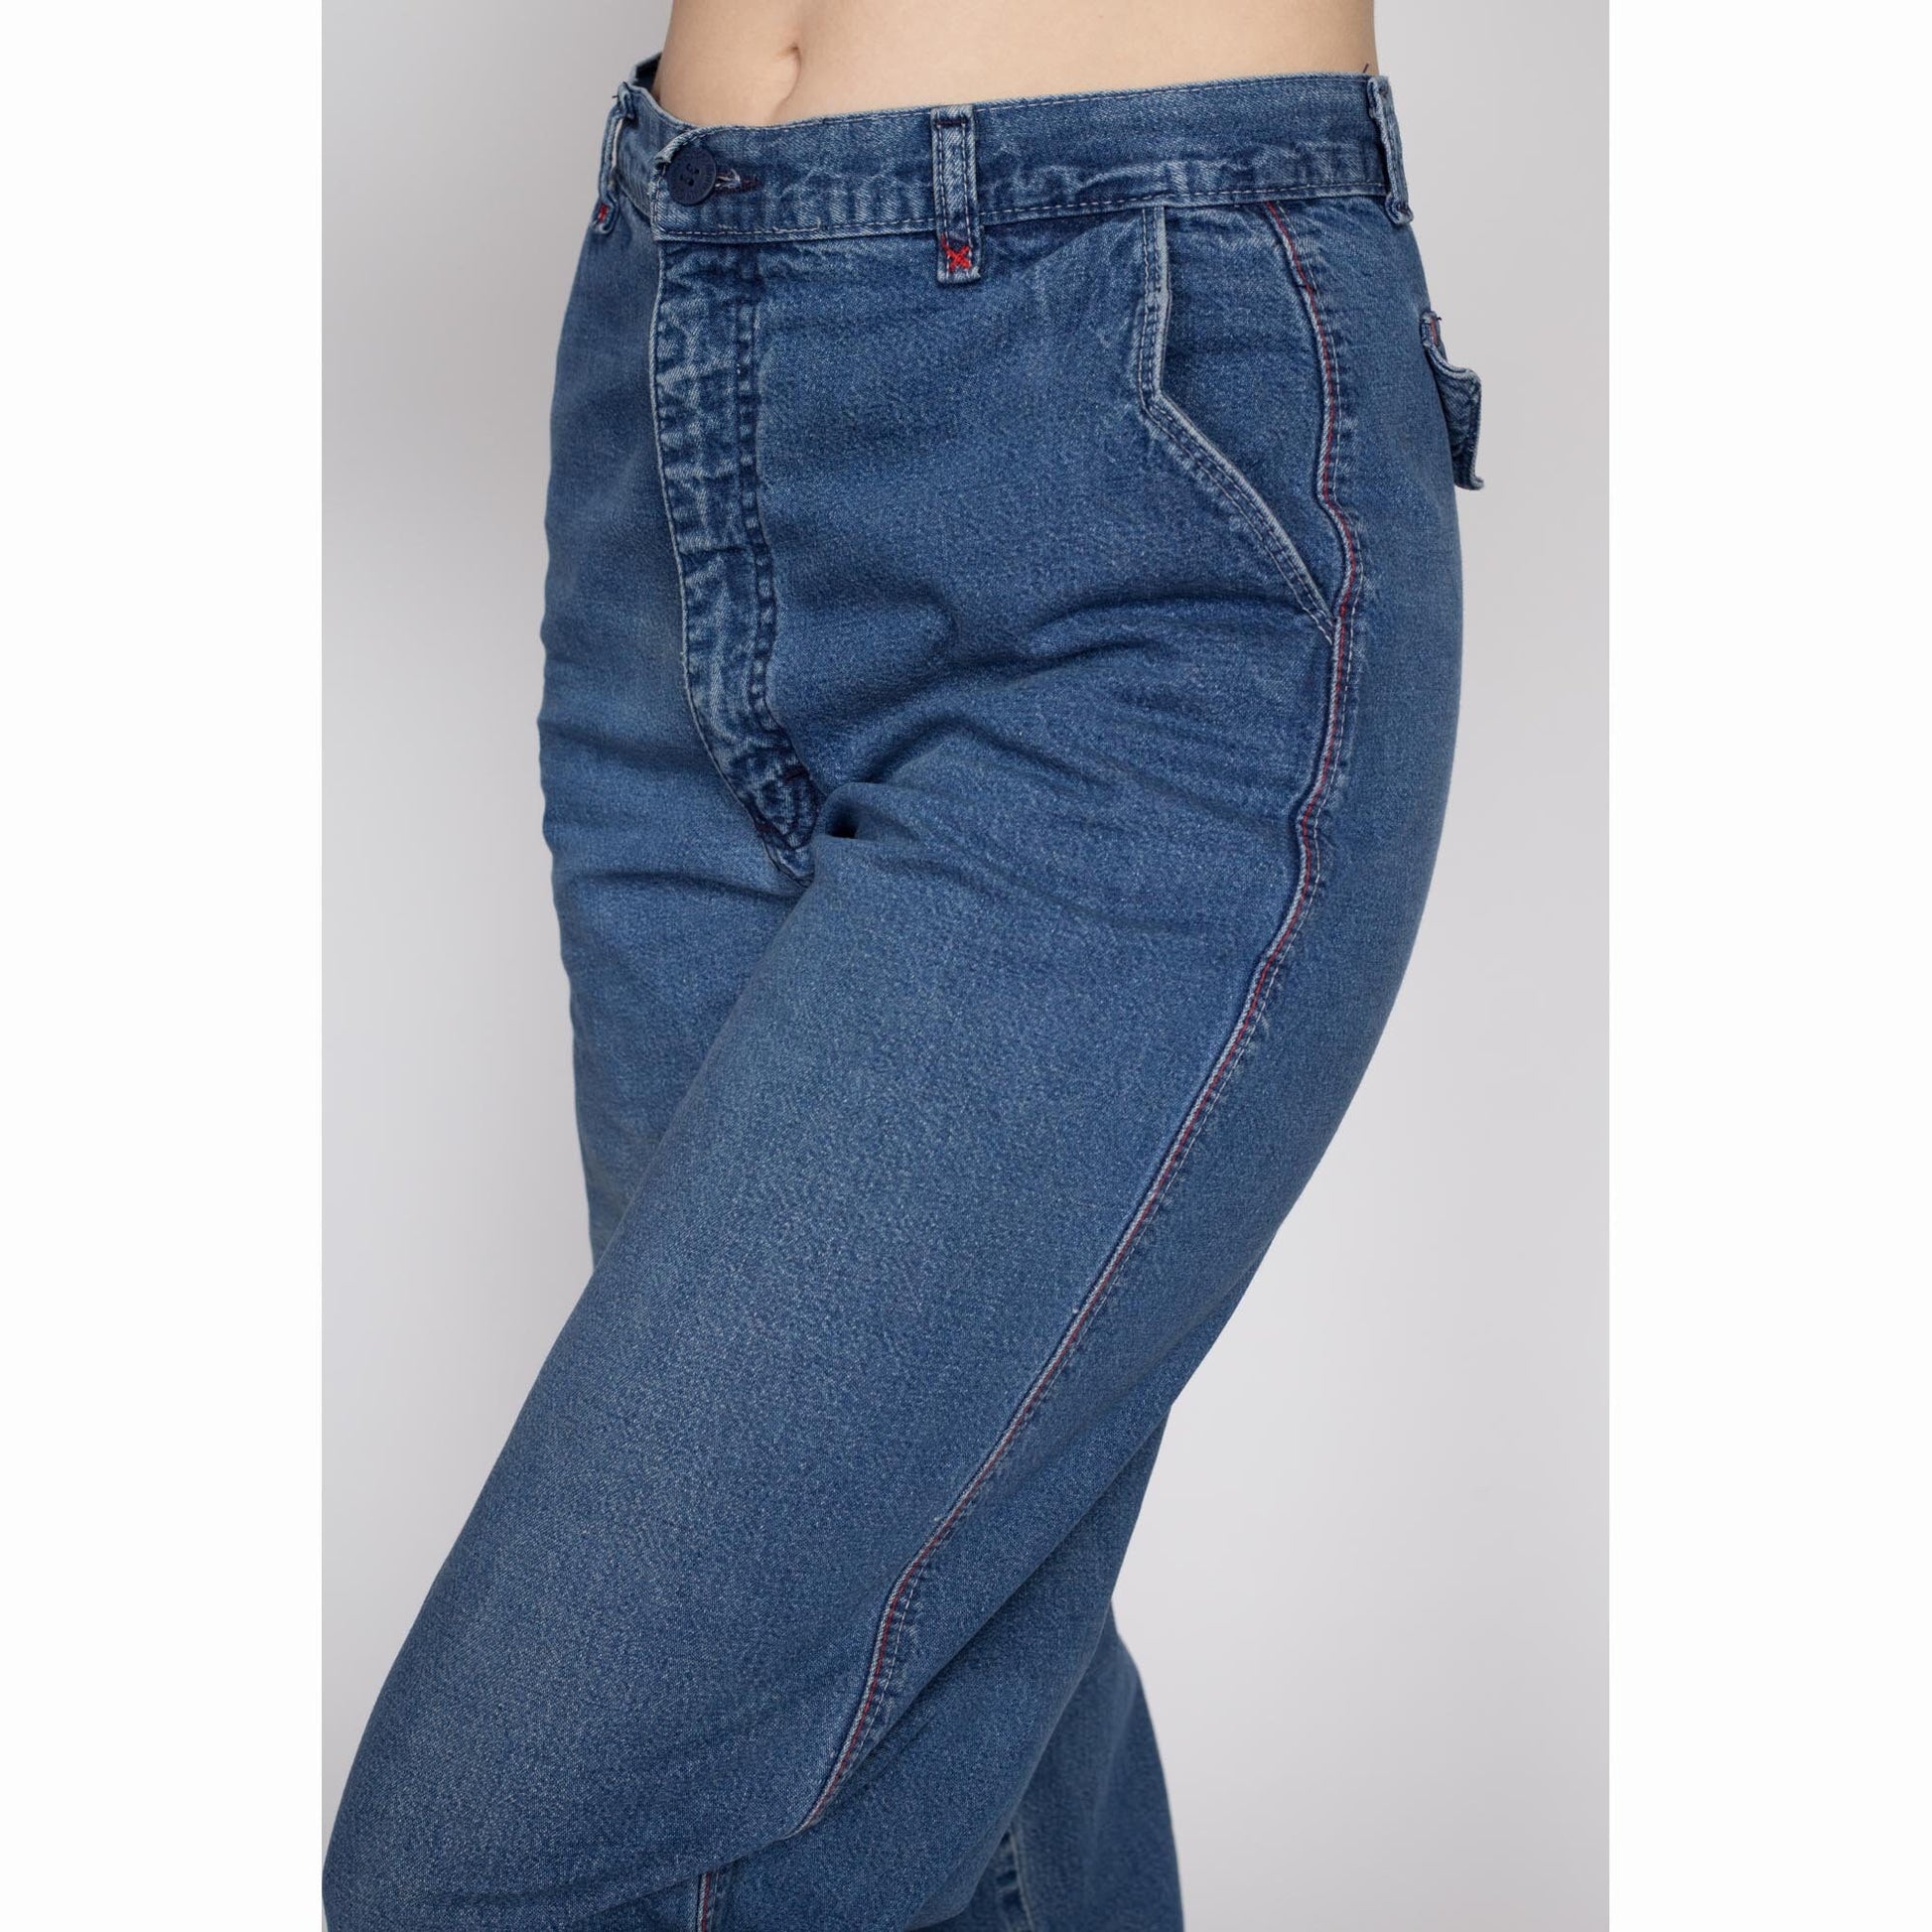 Medium & Large Women High Waisted Denim Jeans at Rs 250/piece in